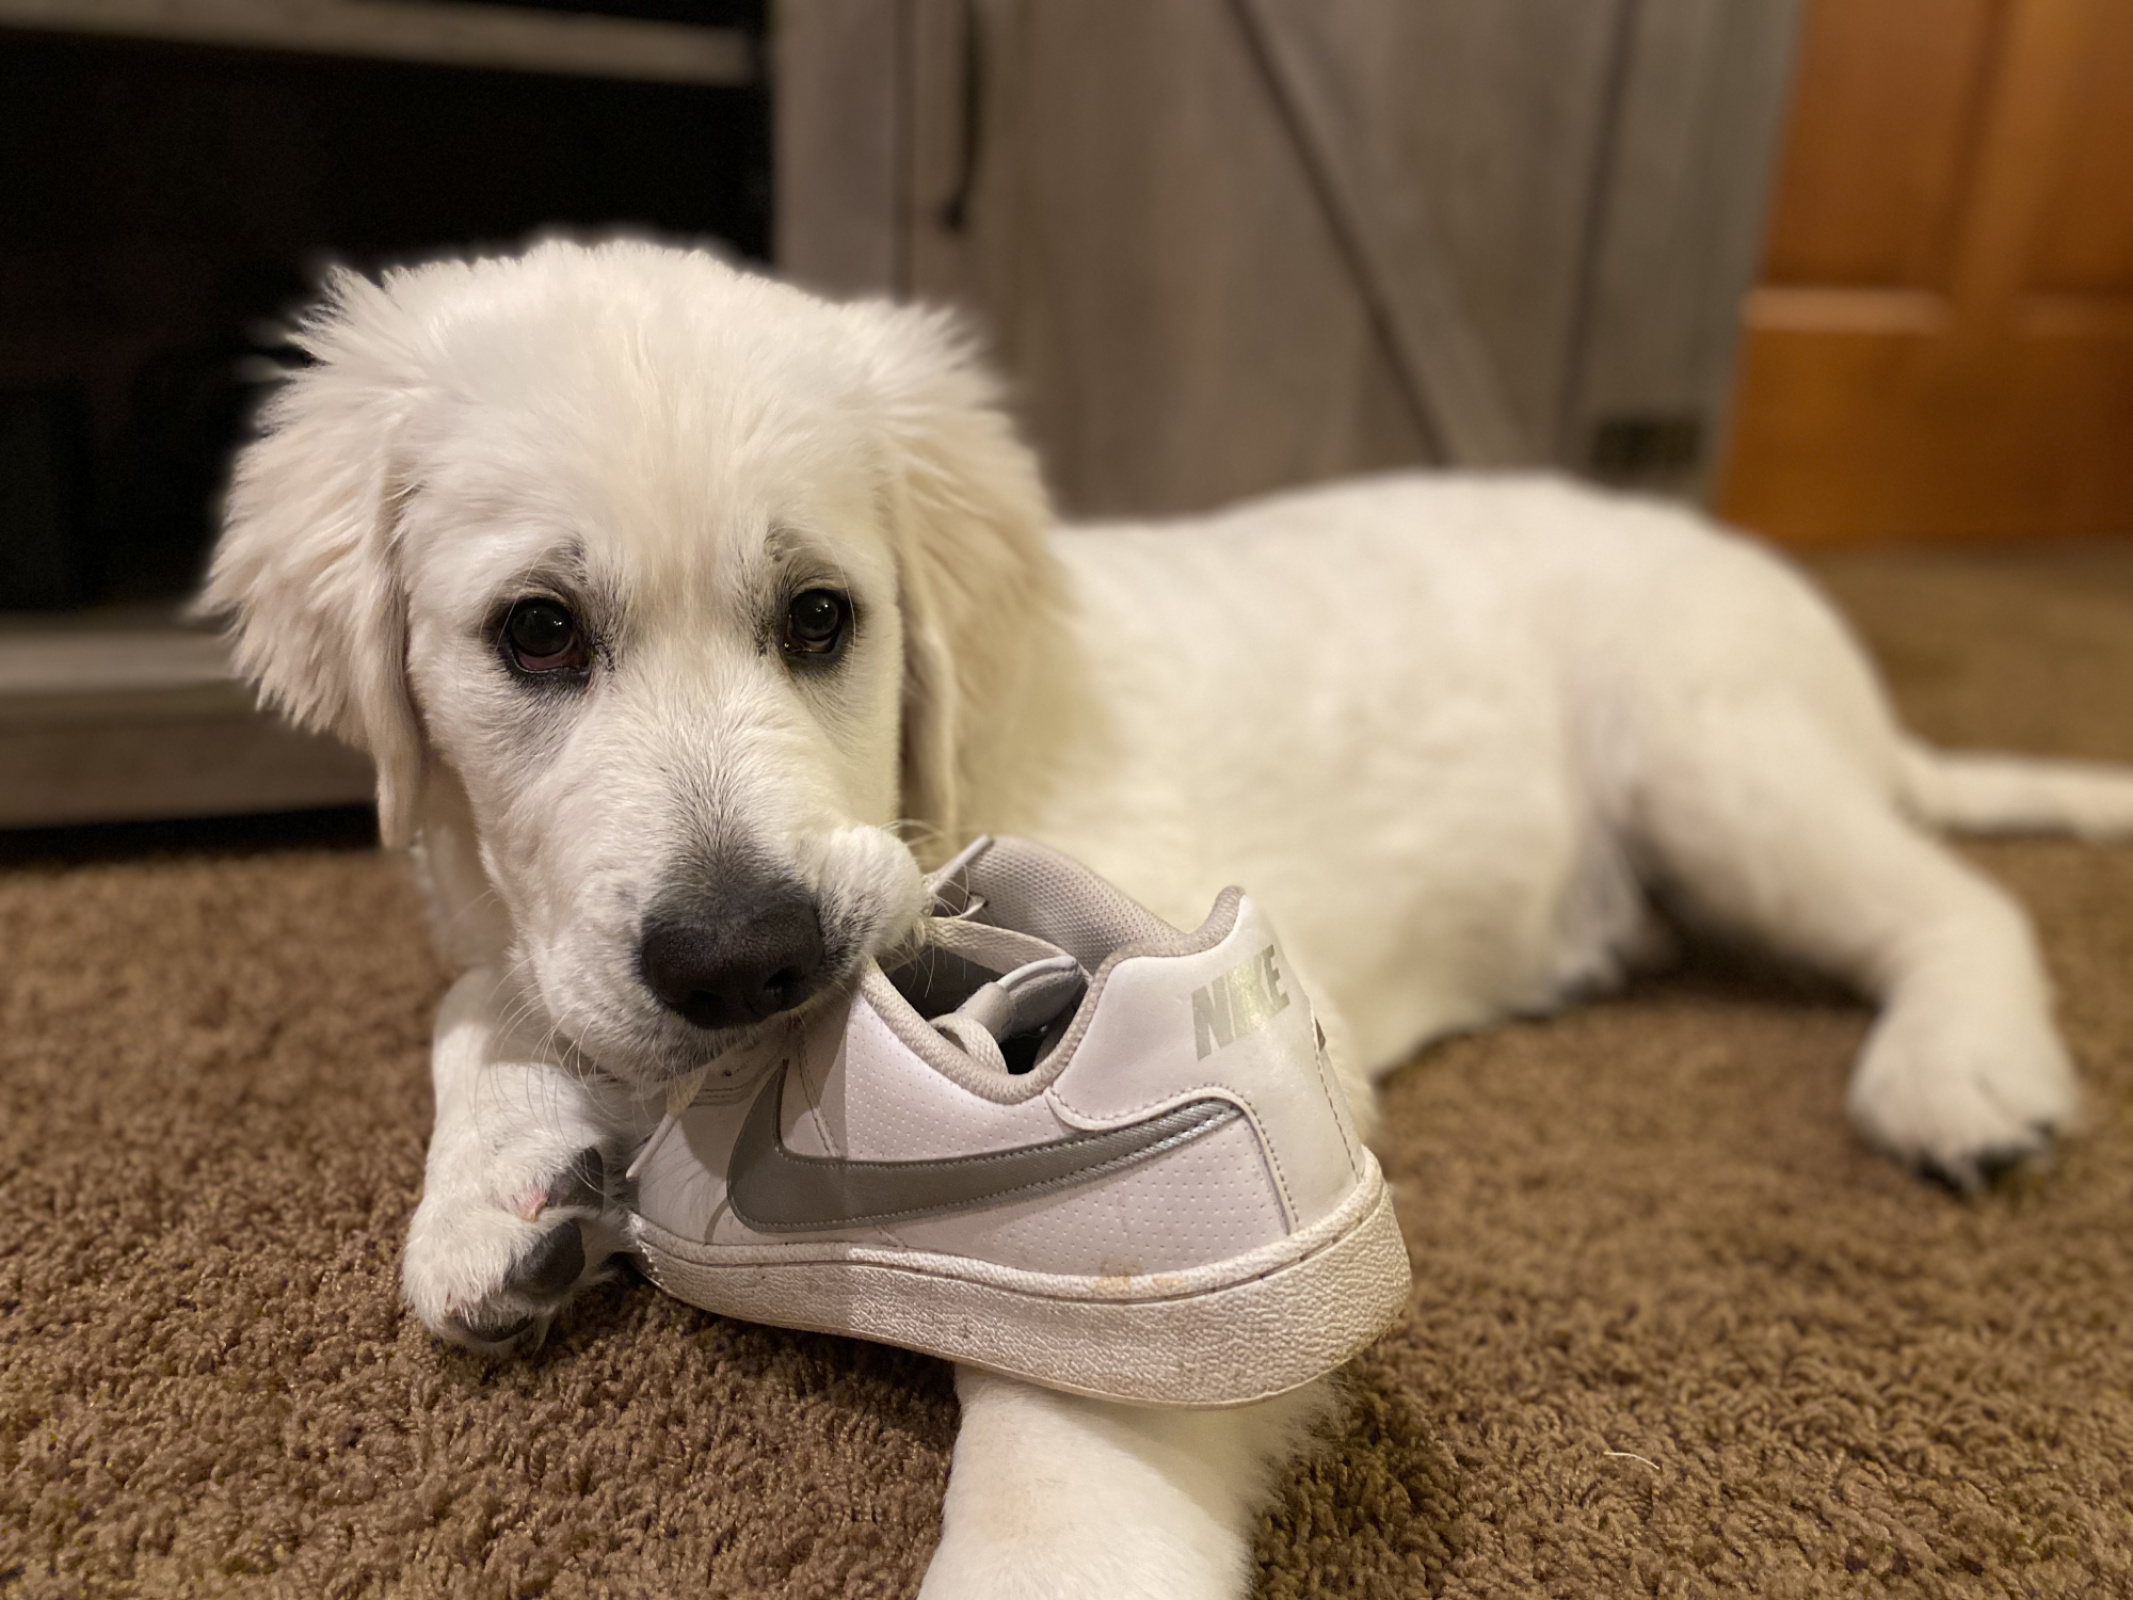 He wasn't getting my attention so he grabbed my shoe and laid in front of me--no chewing just staring.